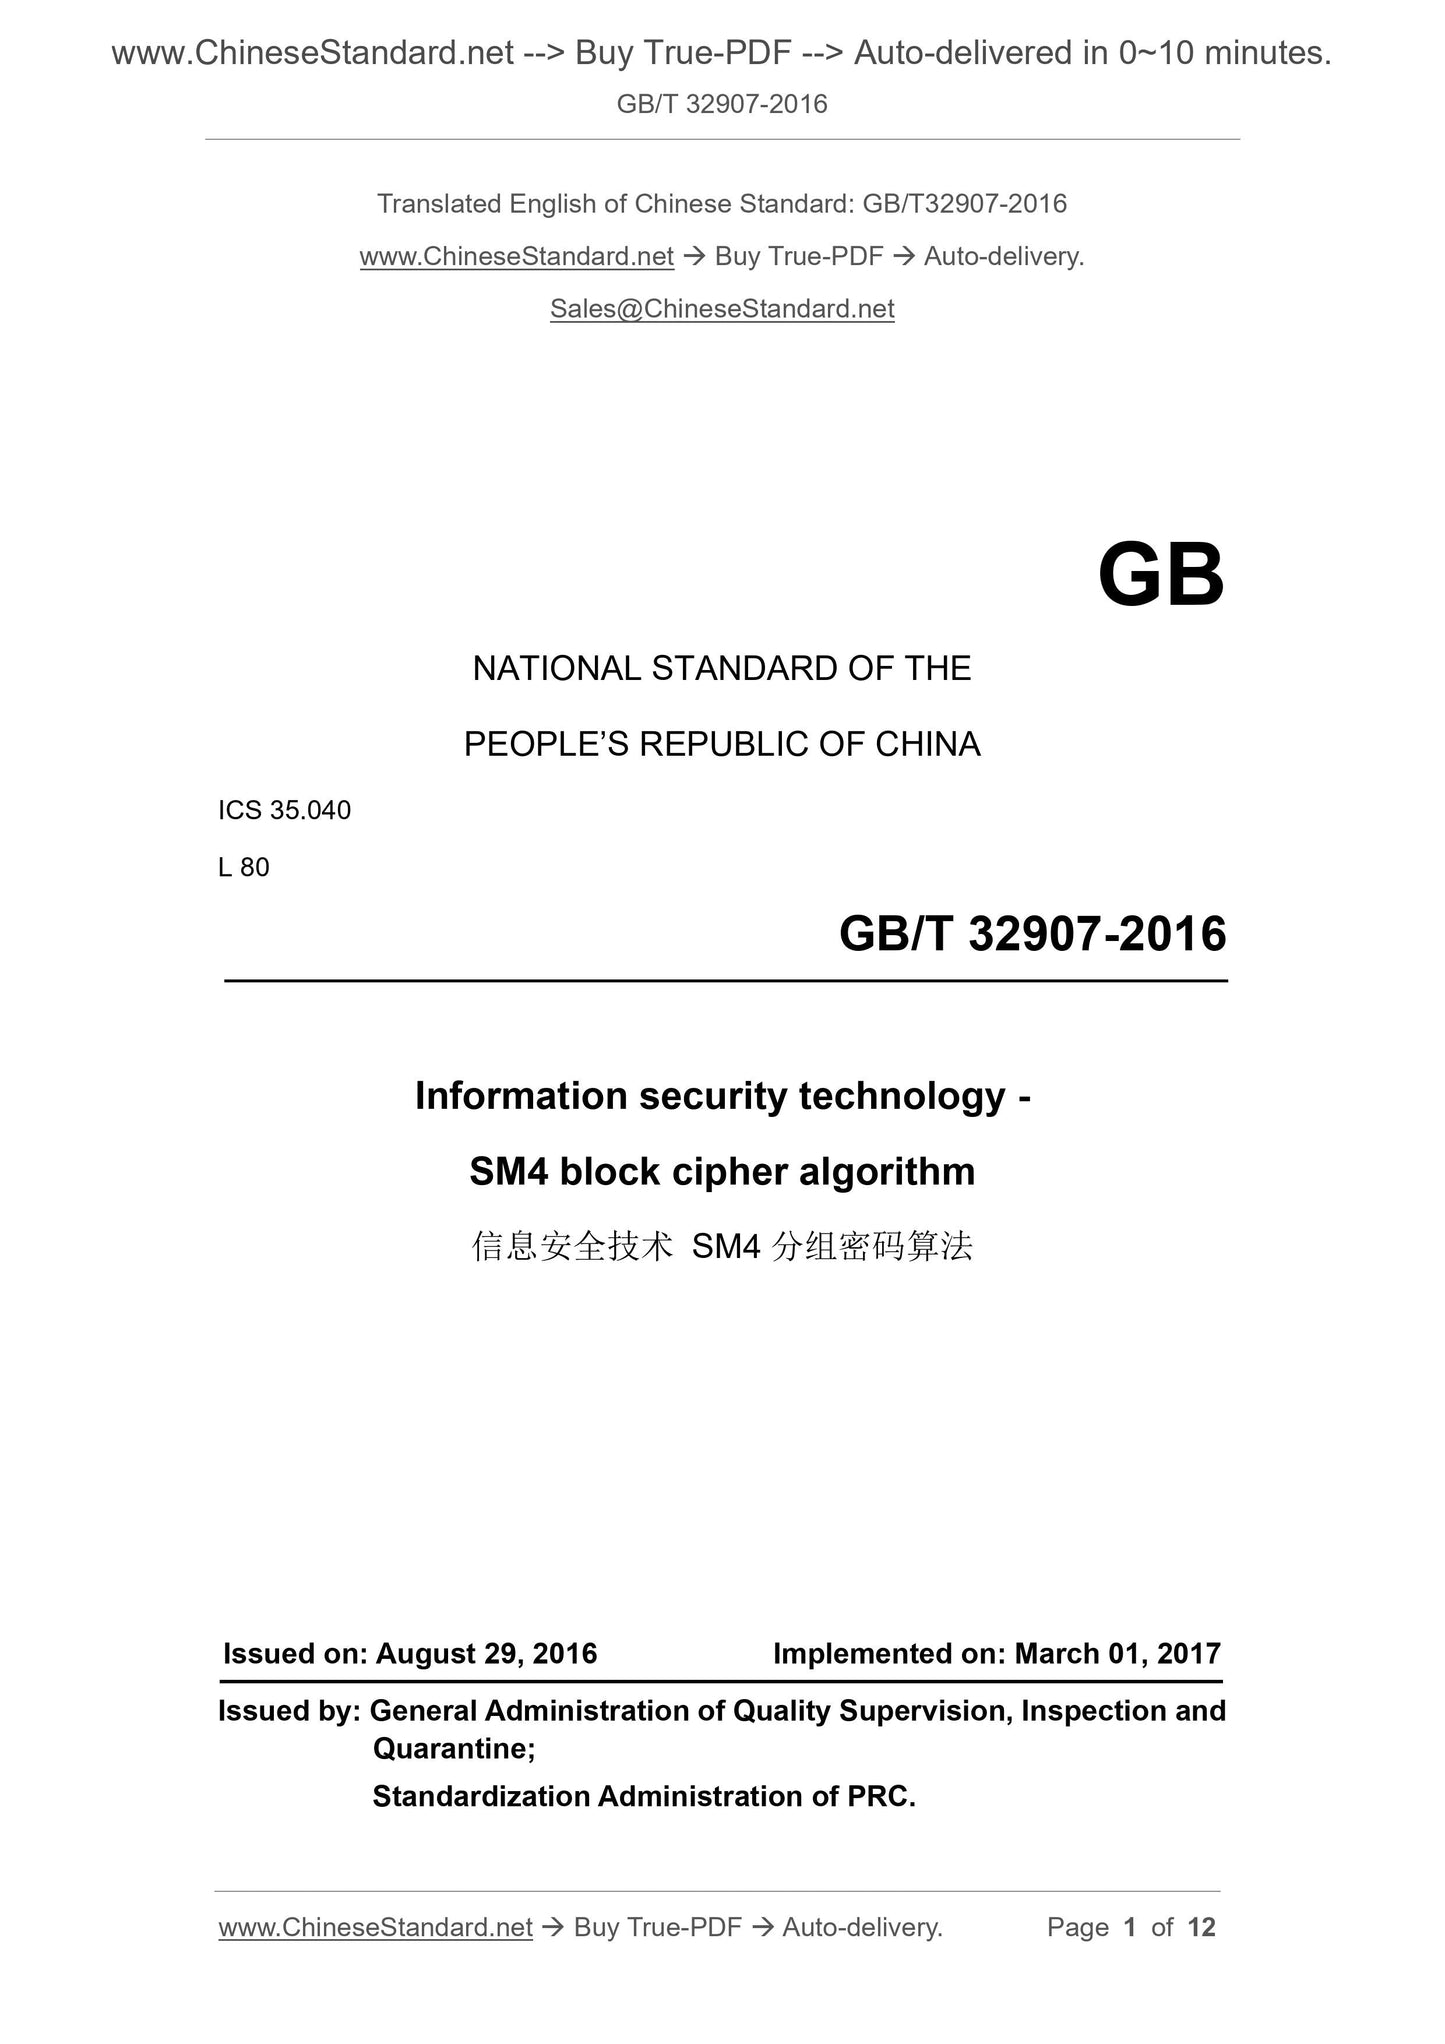 GB/T 32907-2016 Page 1